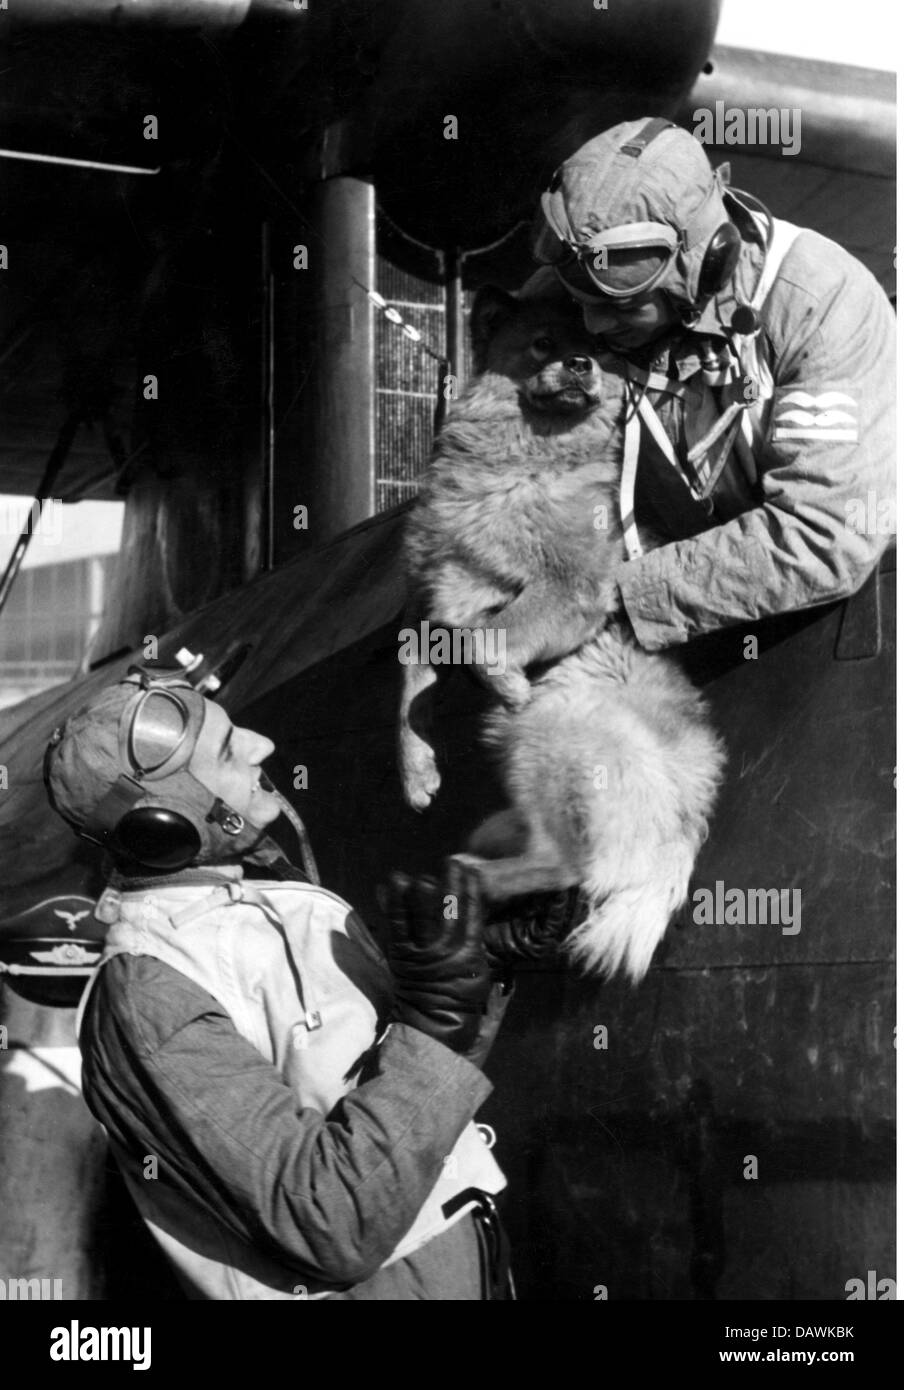 events, Second World War / WWII, aerial warfare, persons, pilot of a German flying boat with his dog before a mission, circa 1940, Germany, 20th century, maritime reconnaissance aircraft, observation, historic, historical, planes, Wehrmacht, Luftwaffe, Third Reich, recce, long-range, boats, Dornier Do 18, Do18, Do-18, aviator, aviators, pilots, soldiers, engine, propeller, airscrew, aircraft, animal, animals, 1940s, people, Additional-Rights-Clearences-Not Available Stock Photo